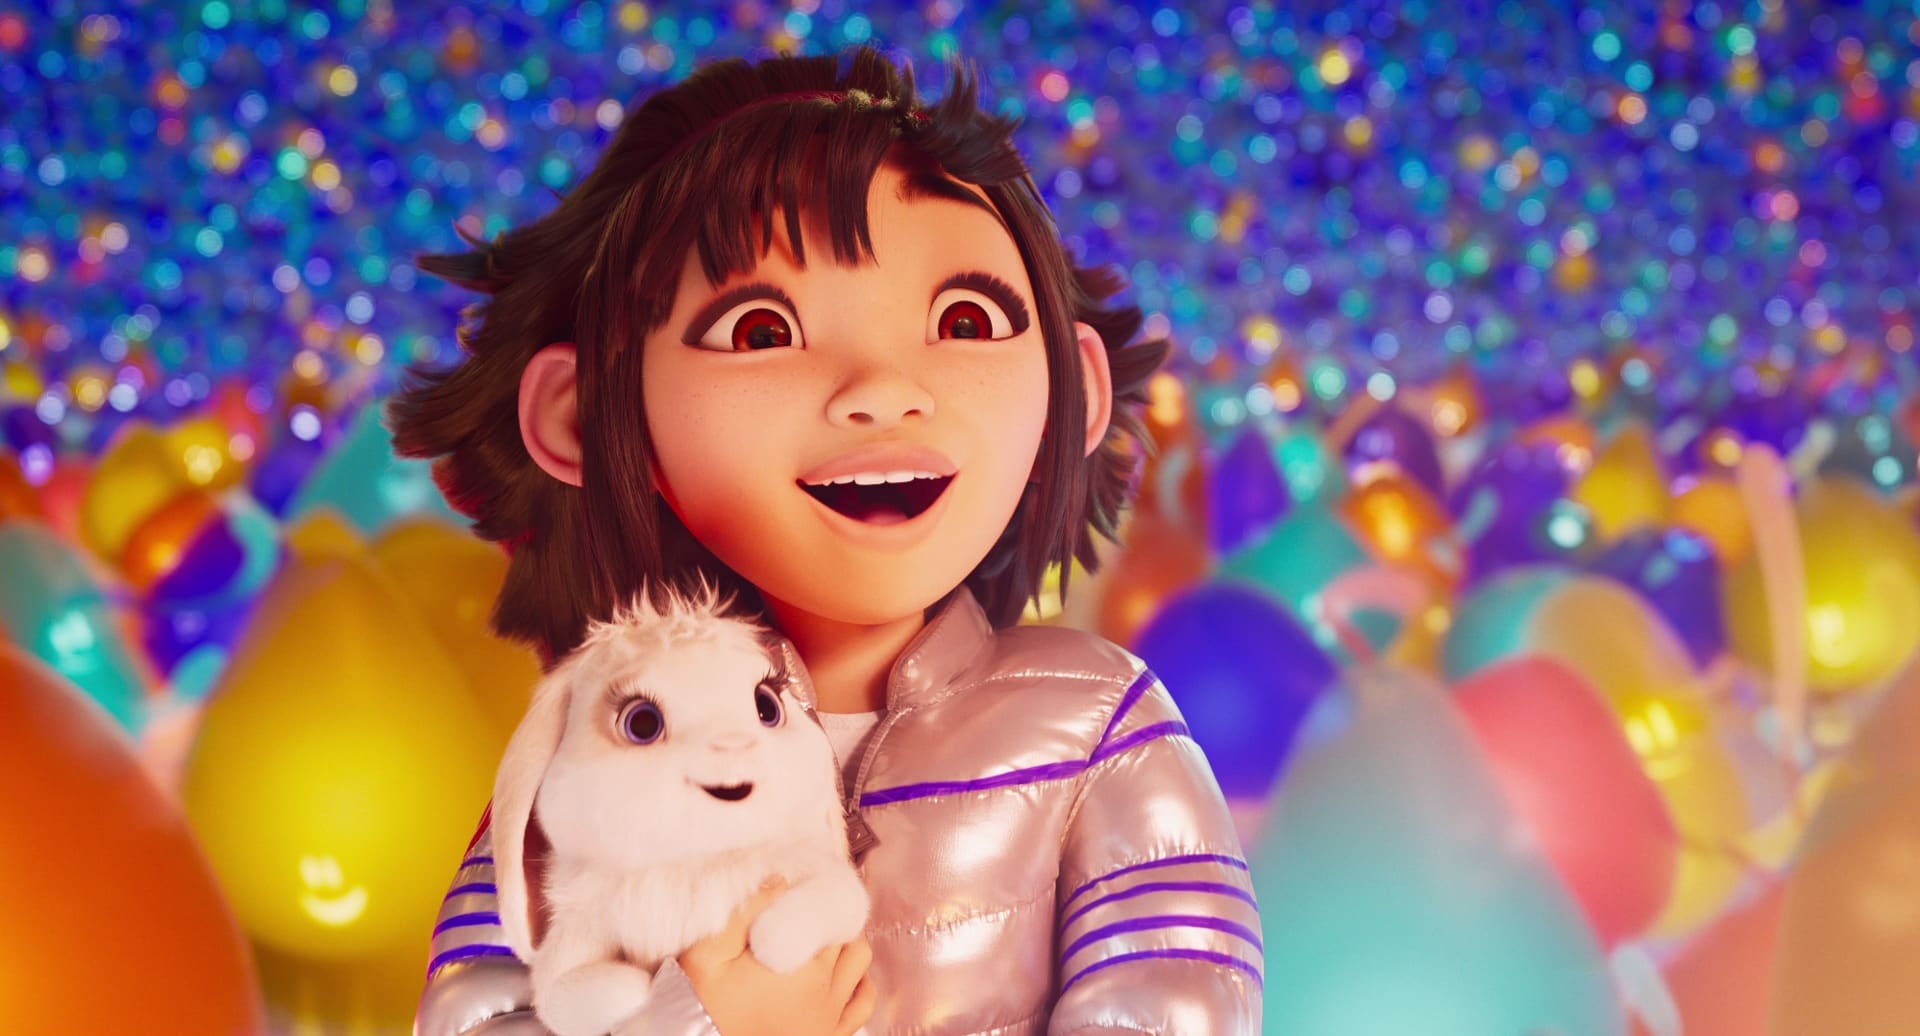 Sony Imageworks Character Animation is Over the Moon - fxguide